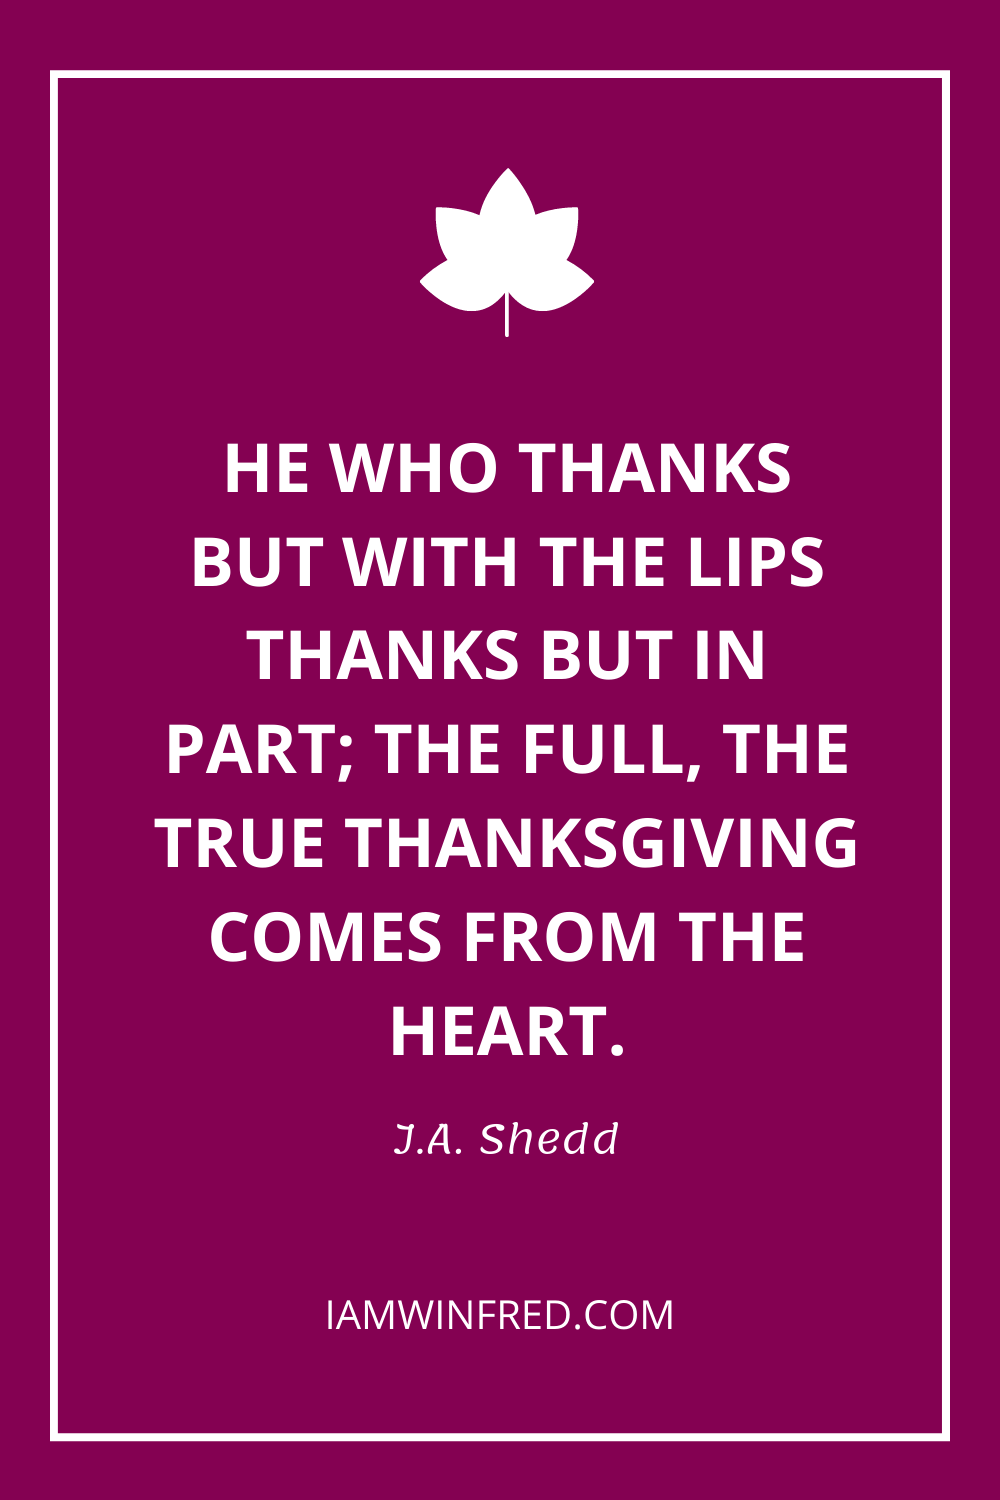 He Who Thanks But With The Lips Thanks But In Part The Full The True Thanksgiving Comes From The Heart.